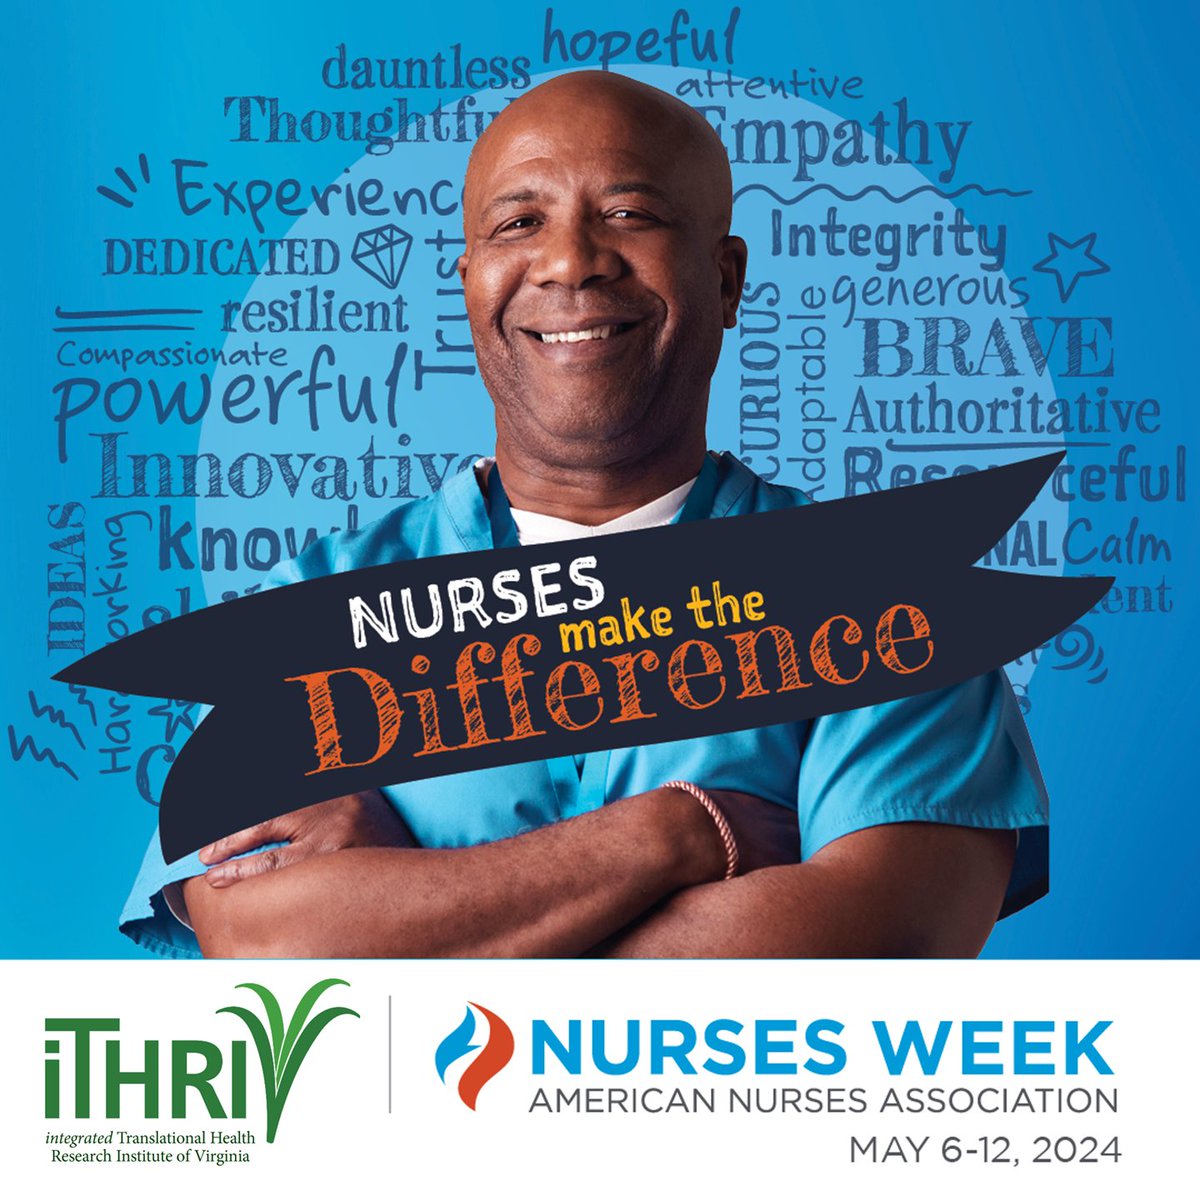 From comforting words to life-saving actions, they embody excellence every single day. Let's take a moment to appreciate and celebrate these incredible individuals for all that they do. #NursesRock #HealthcareHeroes 💙